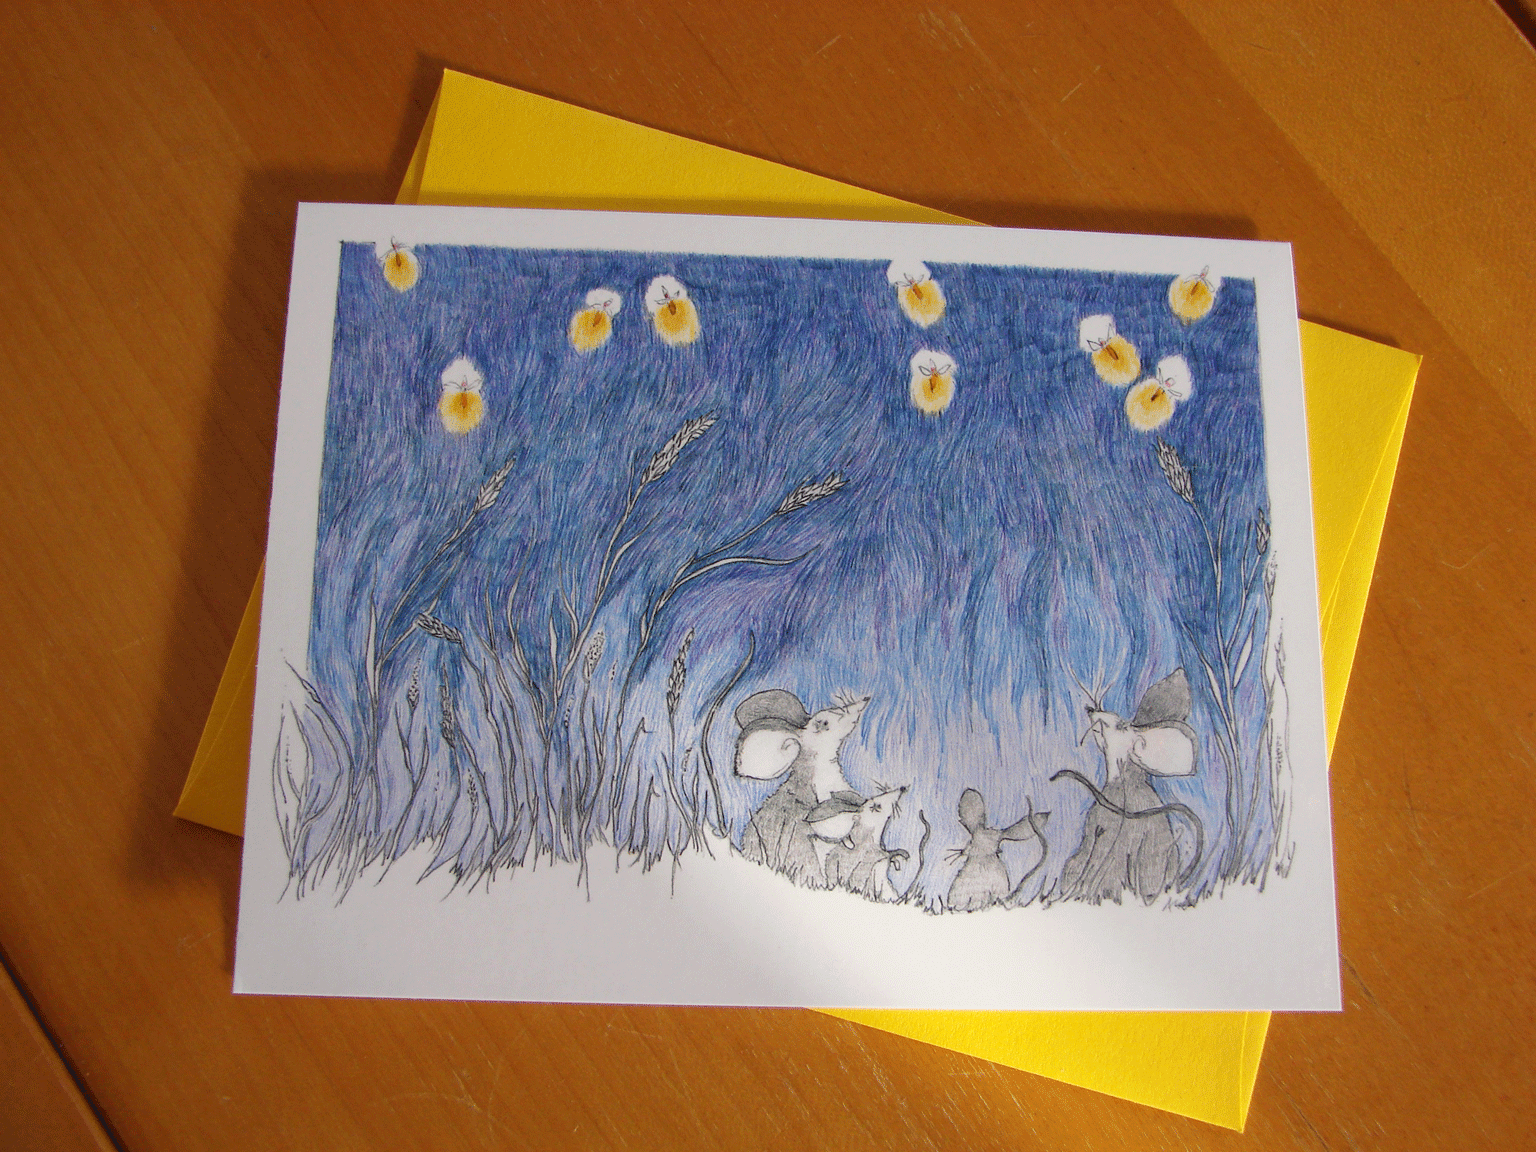 Photo of a card featuring fieldmice watching a display of fireflies.